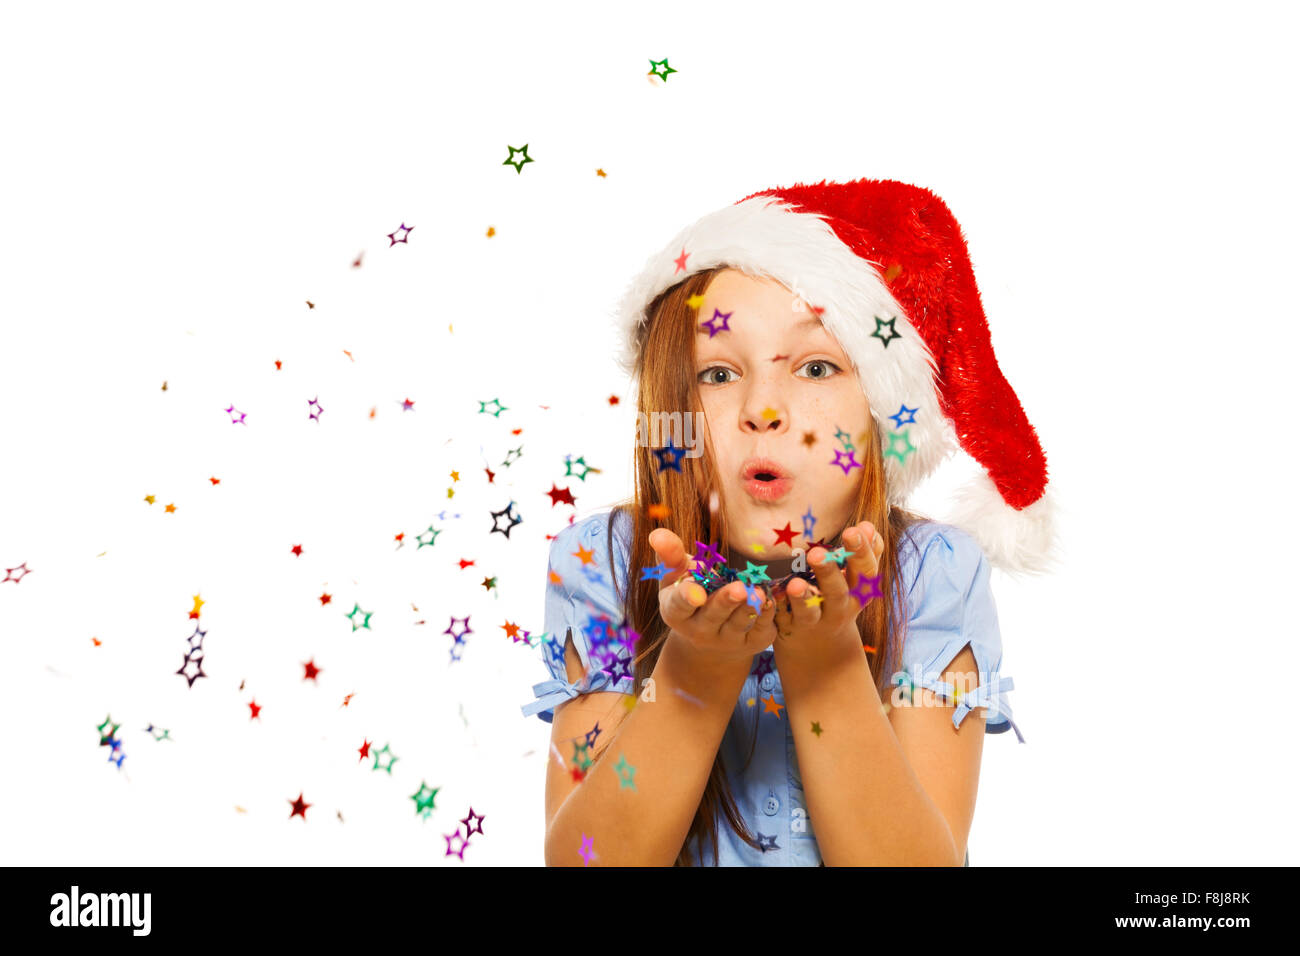 Girl blows confetti from palms in Santa hat Stock Photo